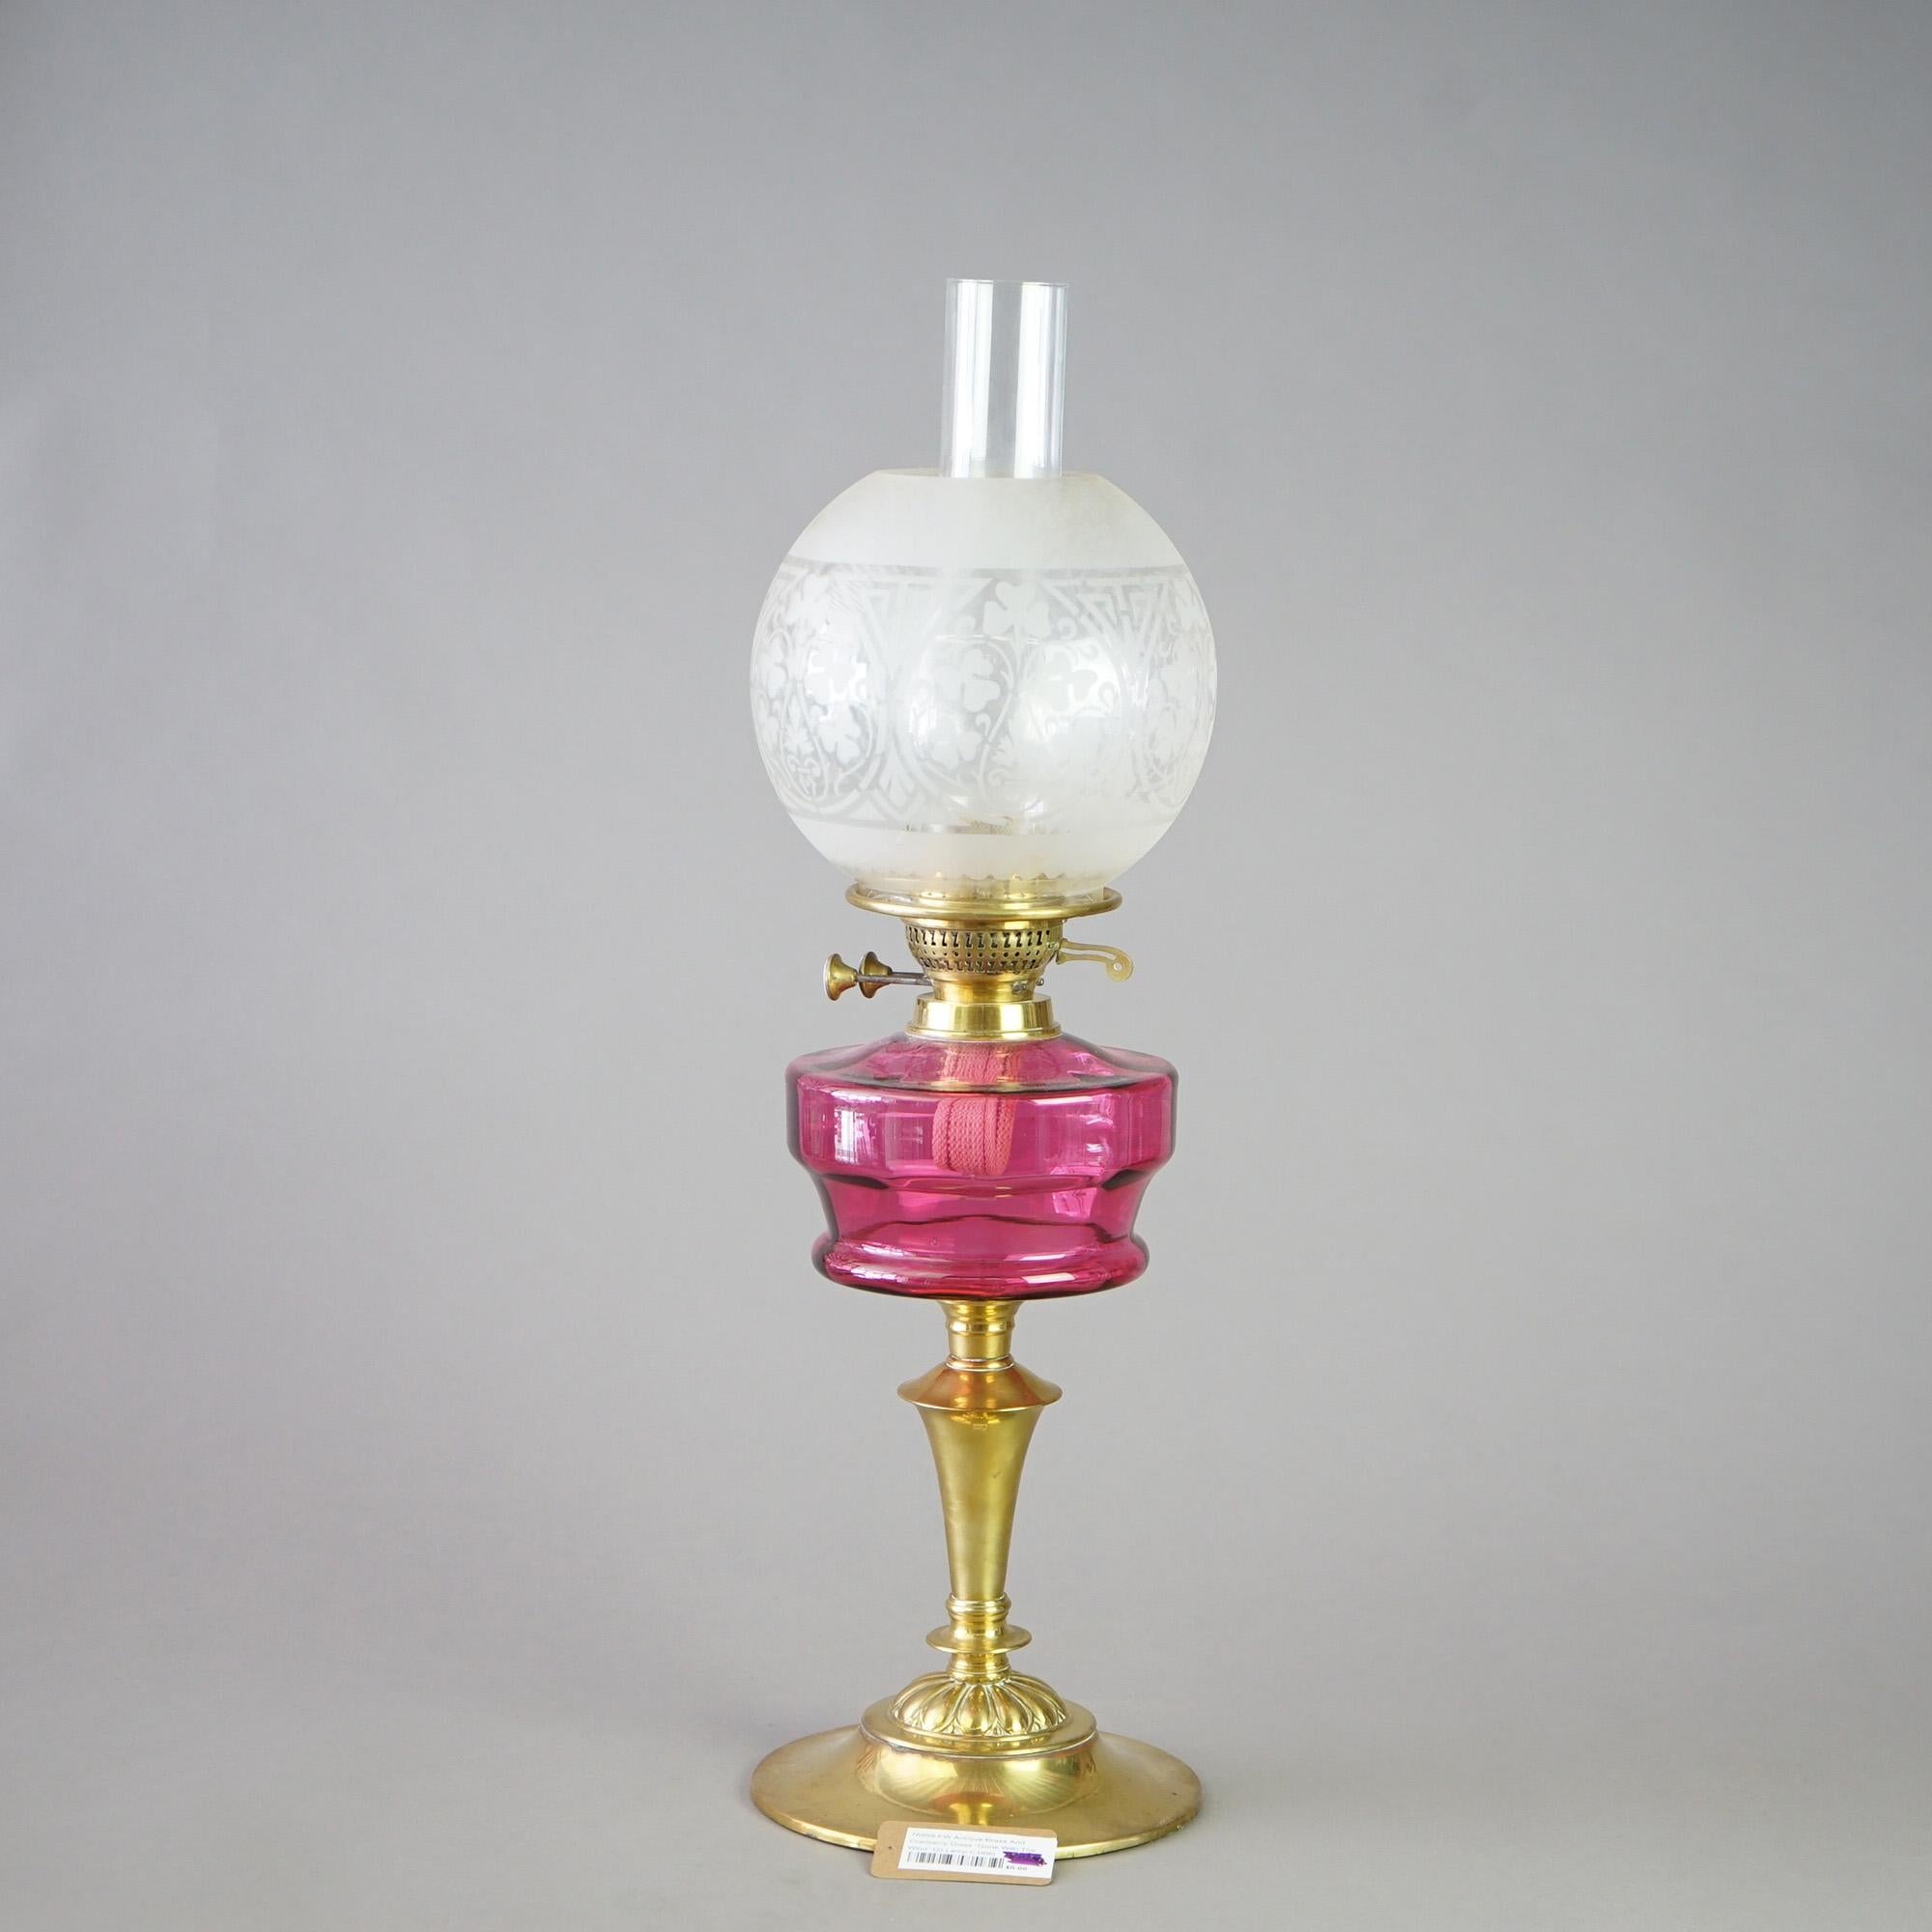 Victorian Antique Brass &Cranberry Glass “Gone With The Wind” Oil Lamp C1890 For Sale